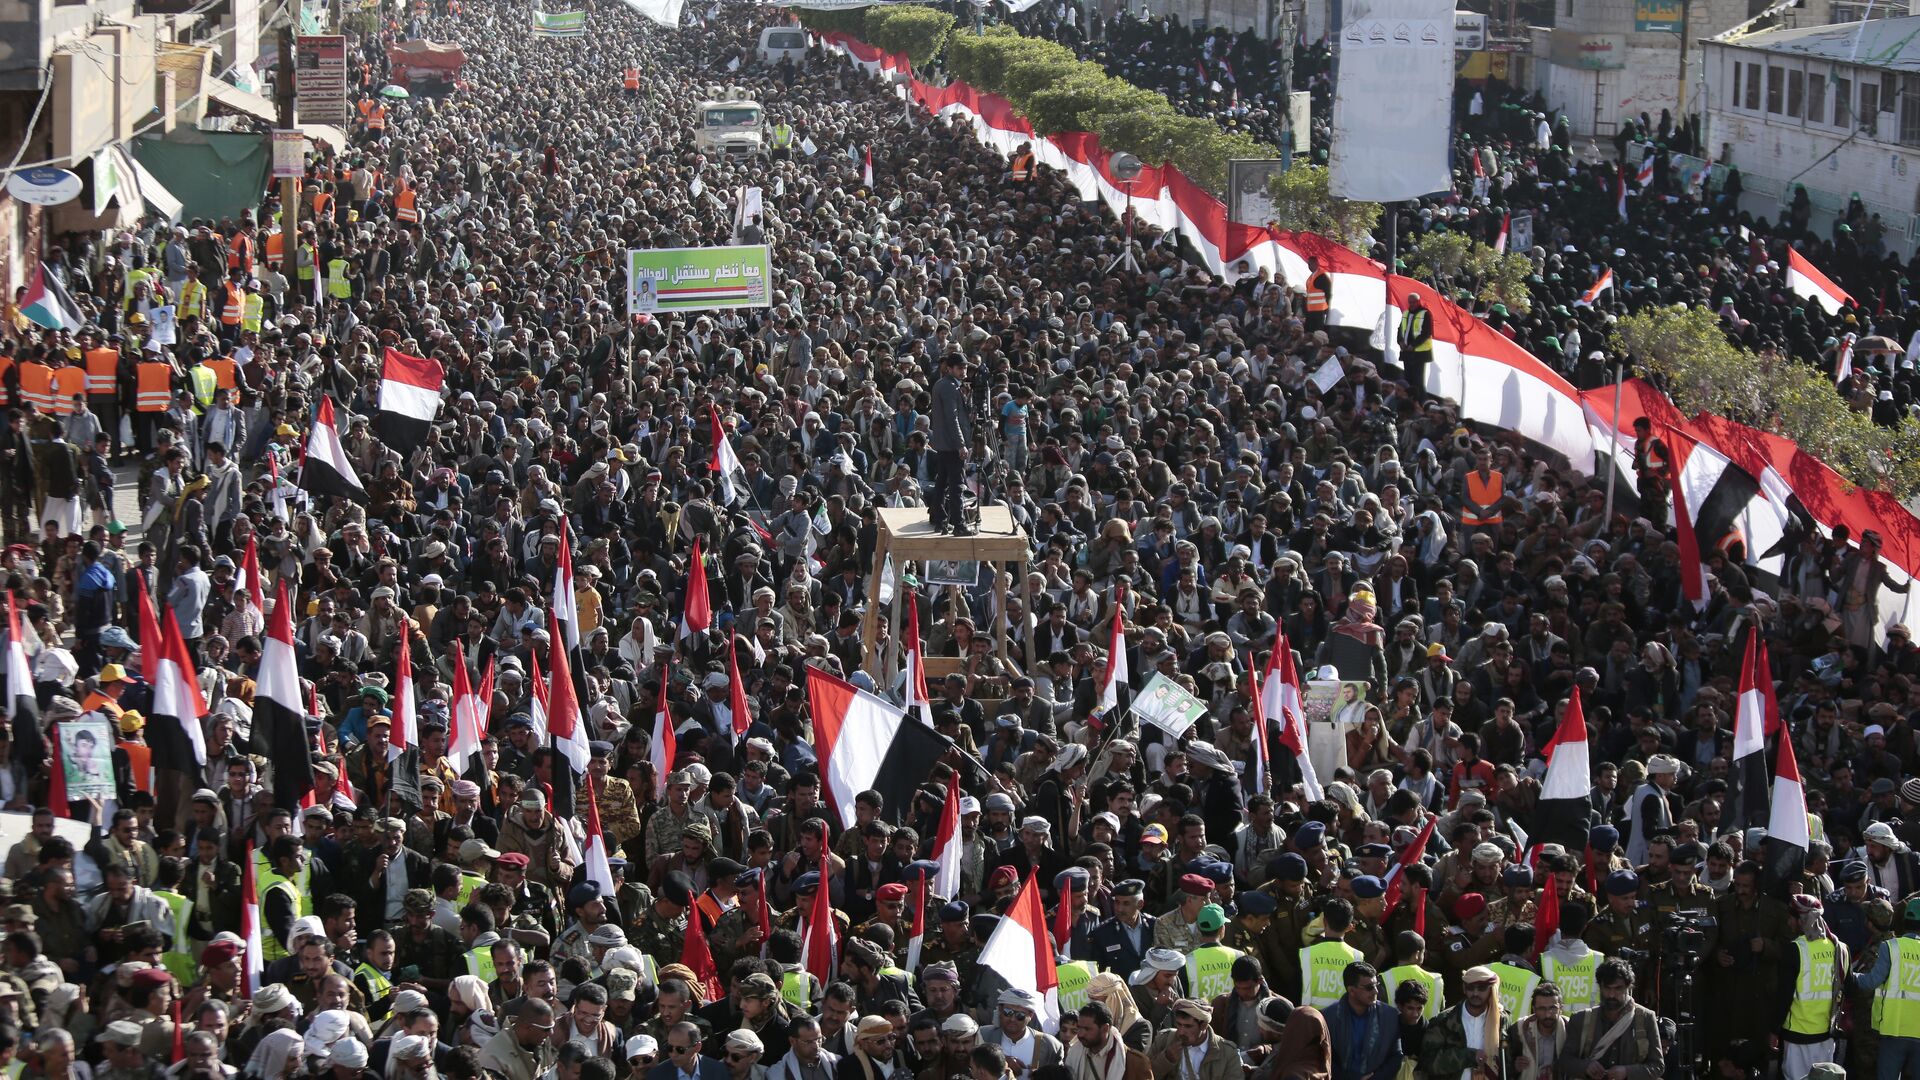 Supporters of Shiite Houthi rebels attend a rally in Sanaa, Yemen, Tuesday, Dec. 5, 2017. The killing of Yemen's ex-President Ali Abdullah Saleh by the country's Shiite rebels on Monday, as their alliance crumbled, has thrown the nearly three-year civil war into unpredictable new chaos. - Sputnik International, 1920, 01.04.2022